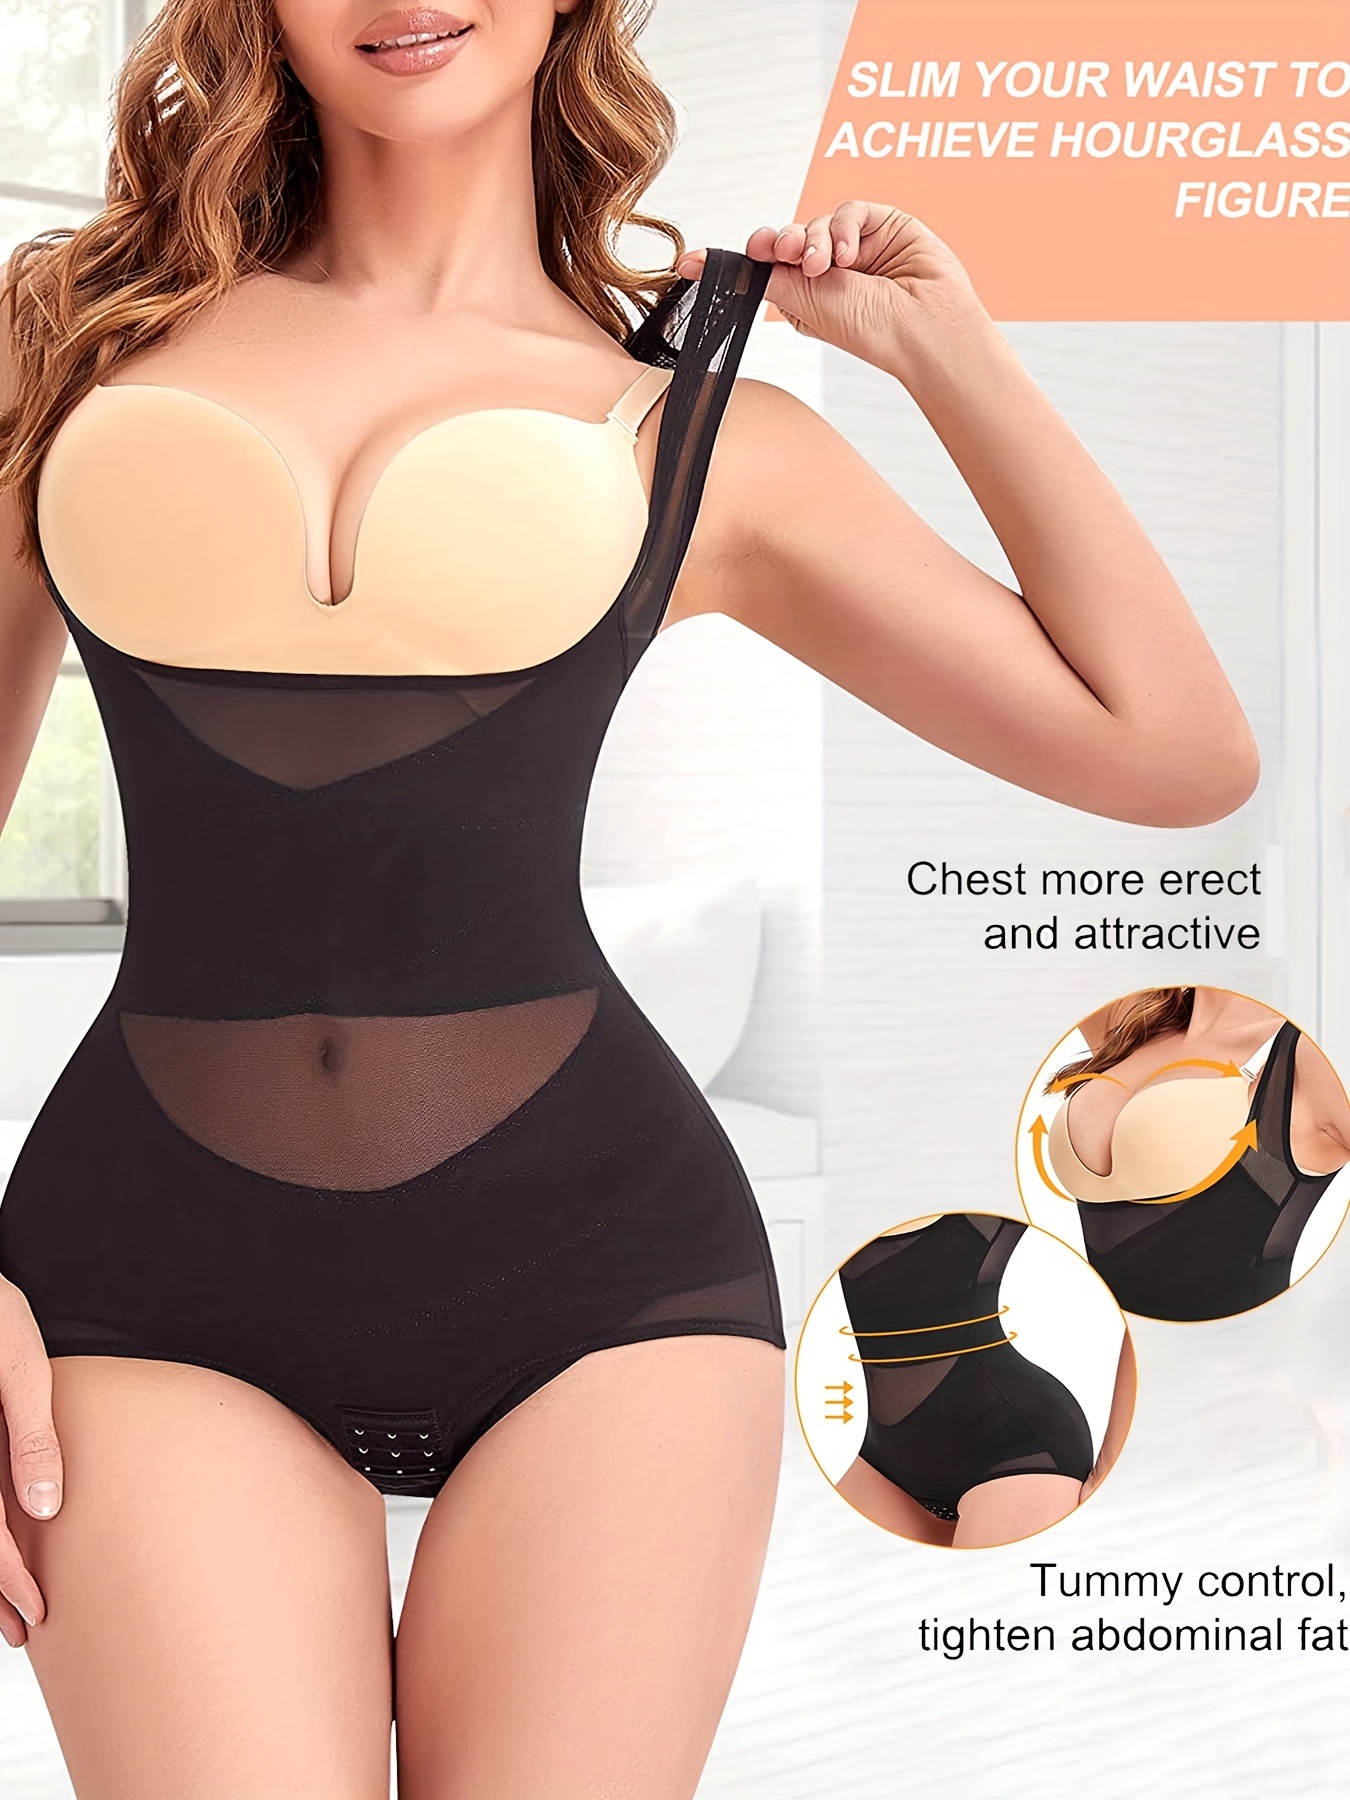 Waist Trainers and Bodysuits That Could Help Flatten Your Tummy